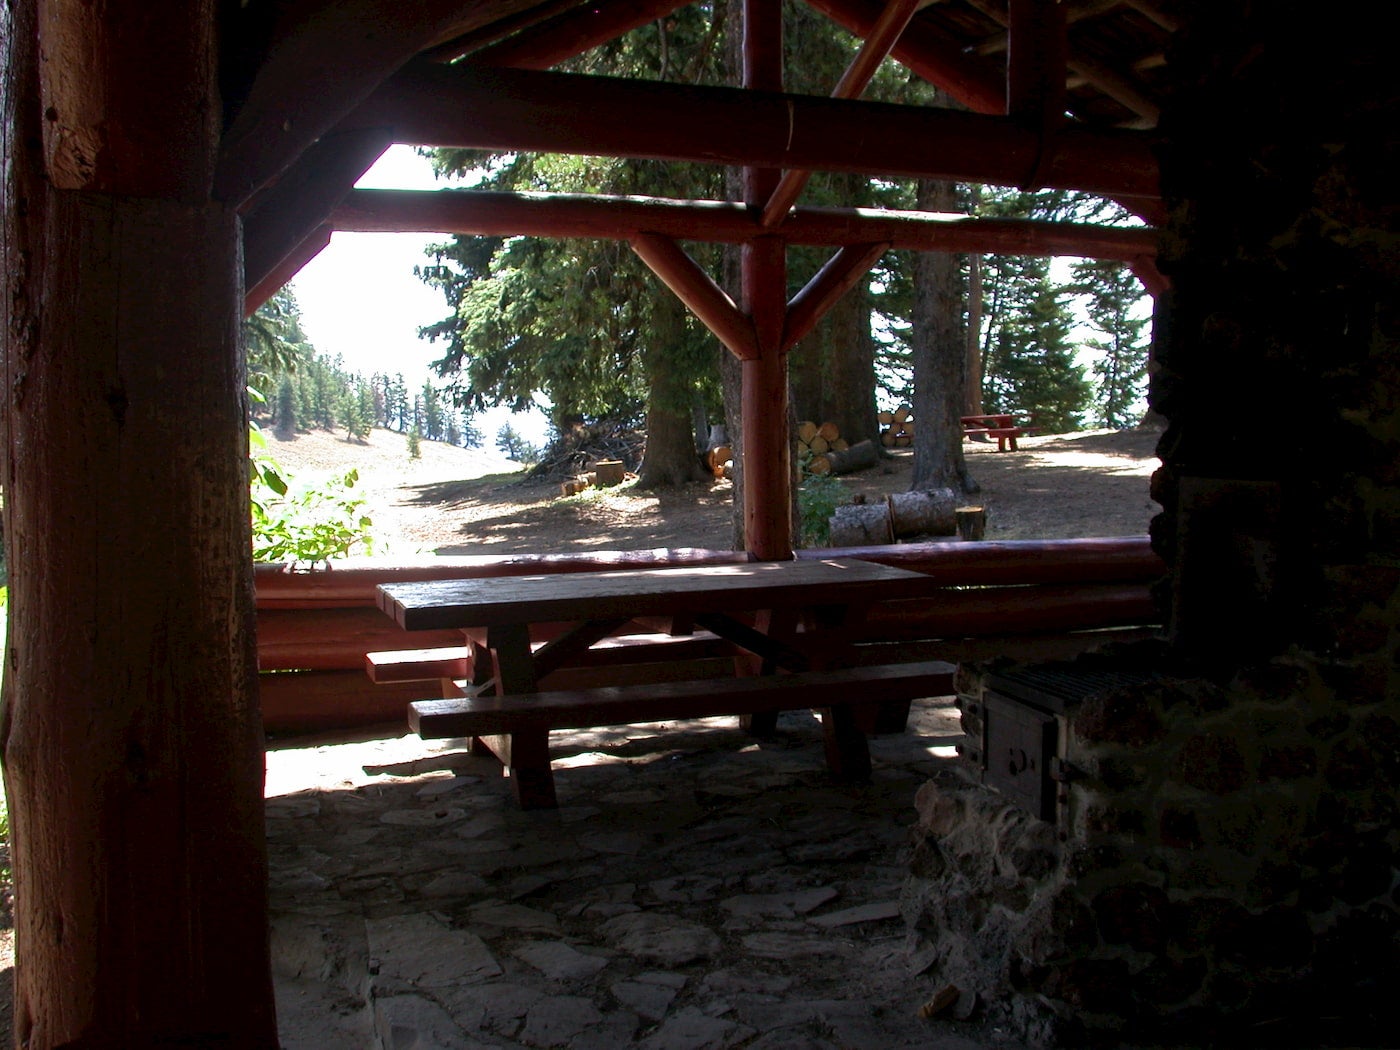 Picnic table and stone structure at Godman Campground.